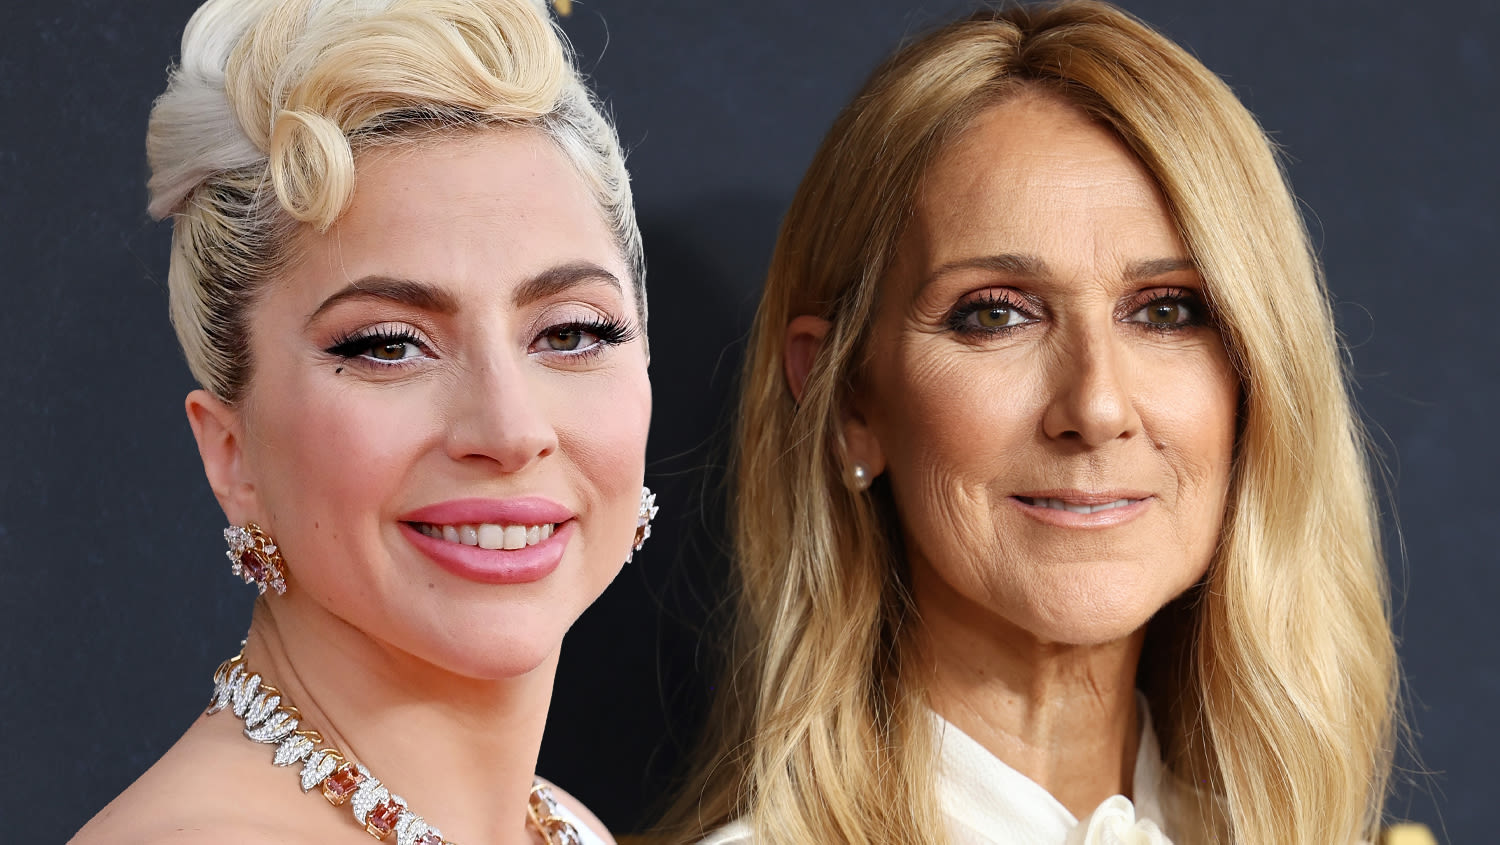 Celine Dion & Lady Gaga Sightings In Paris Spark Speculation Stars Will Perform At Olympics Opening Ceremony